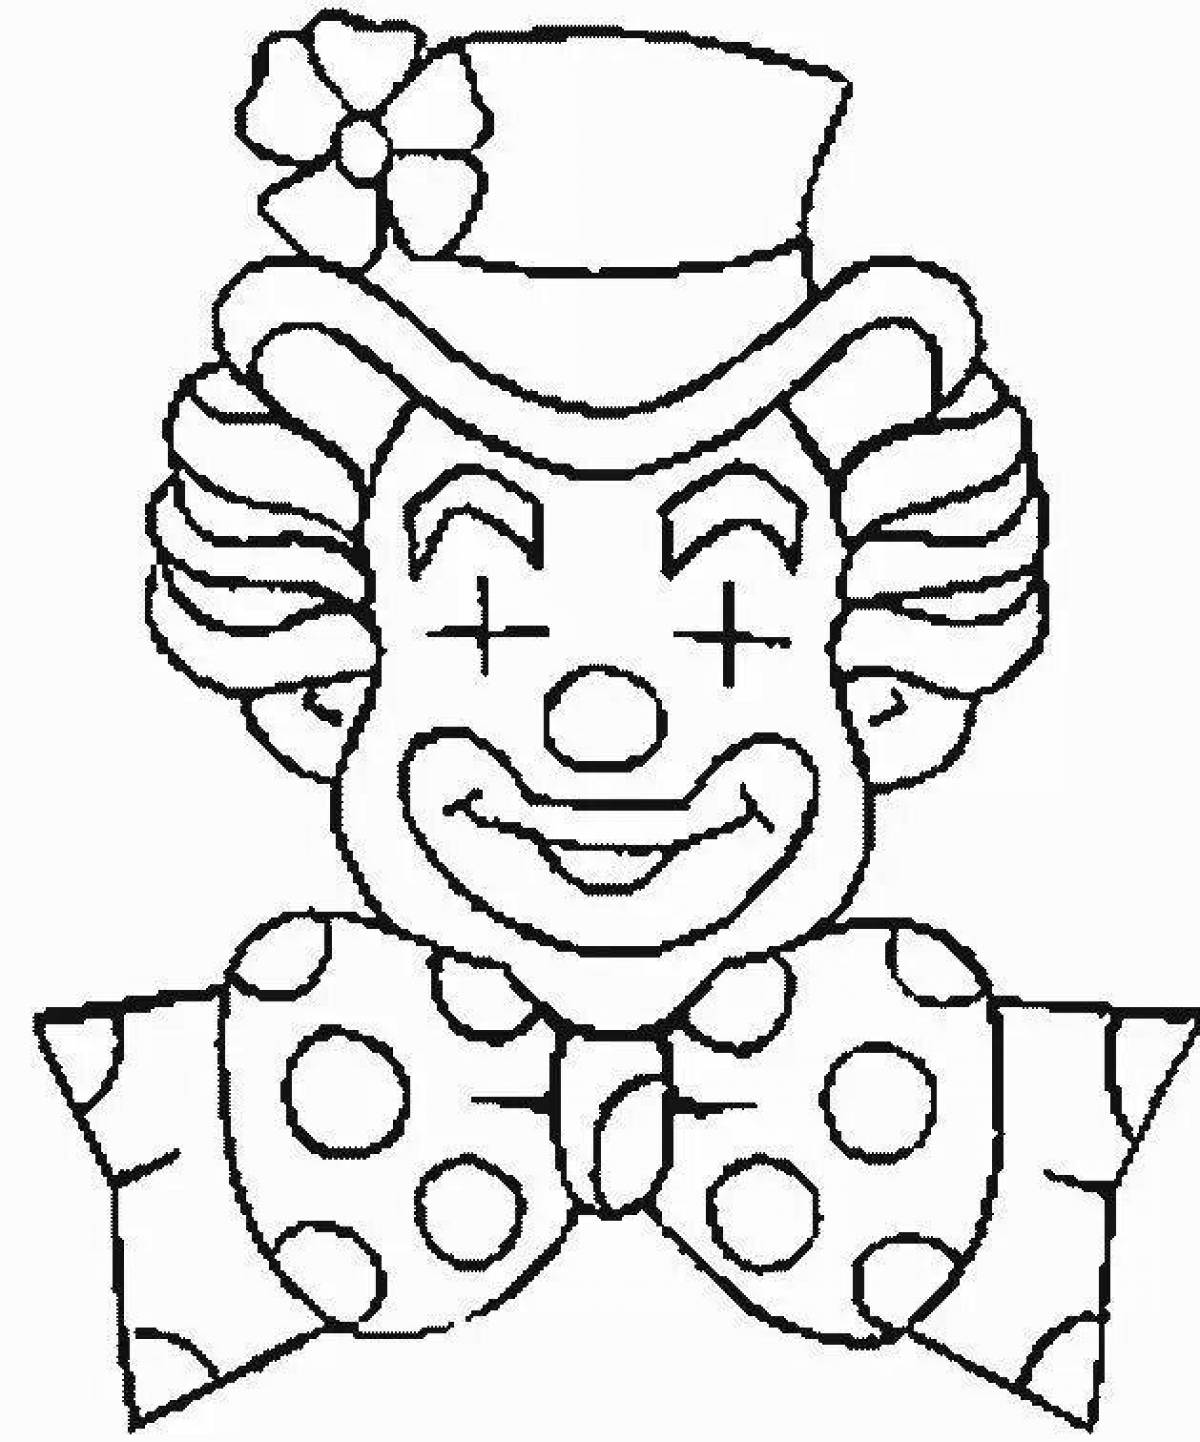 Playful clown face coloring page